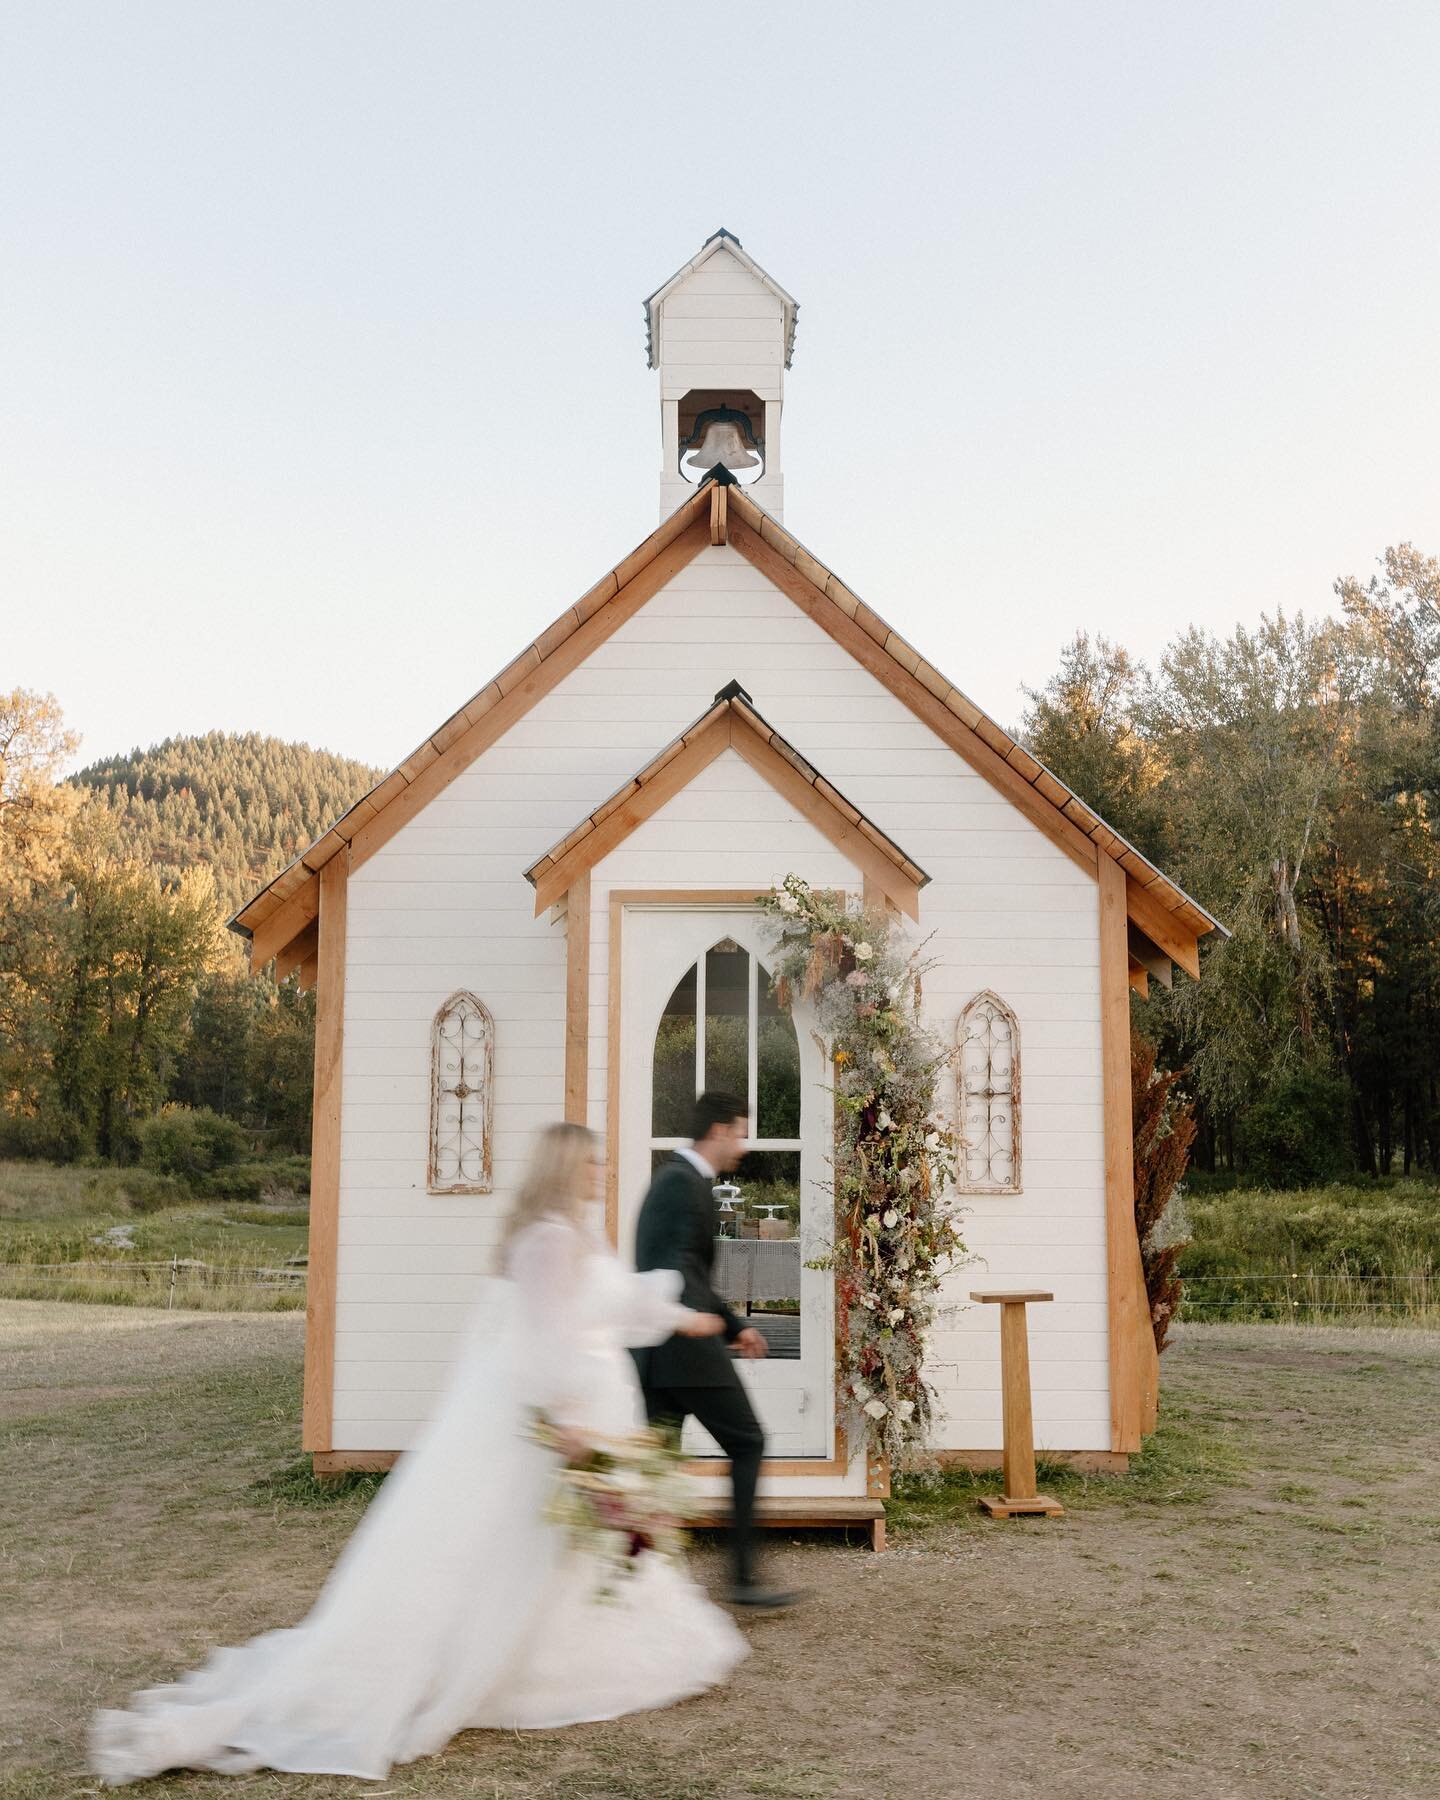 Going to the chapel⛪️ 

Addison has the most incredible eye and created a one in a million day filled with the most beautiful vintage details and intentional moments. These two put in so much work (including building this church on the family ranch),